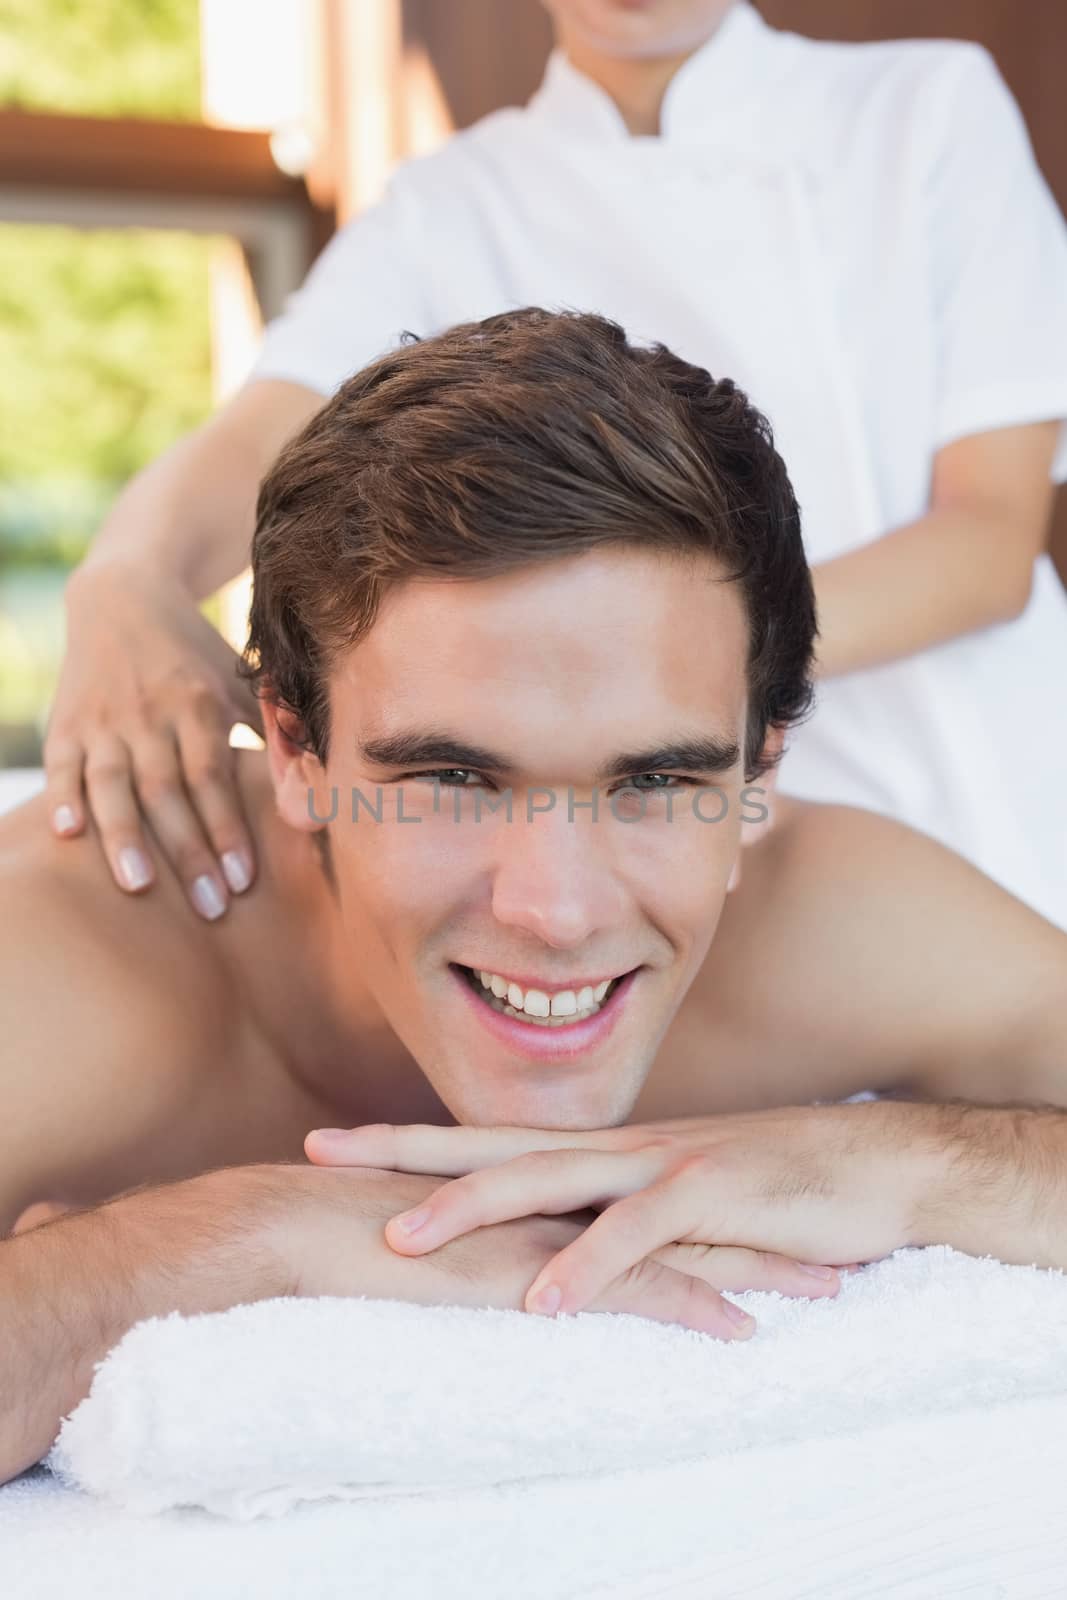 Close up of a handsome young man receiving shoulder massage at spa center